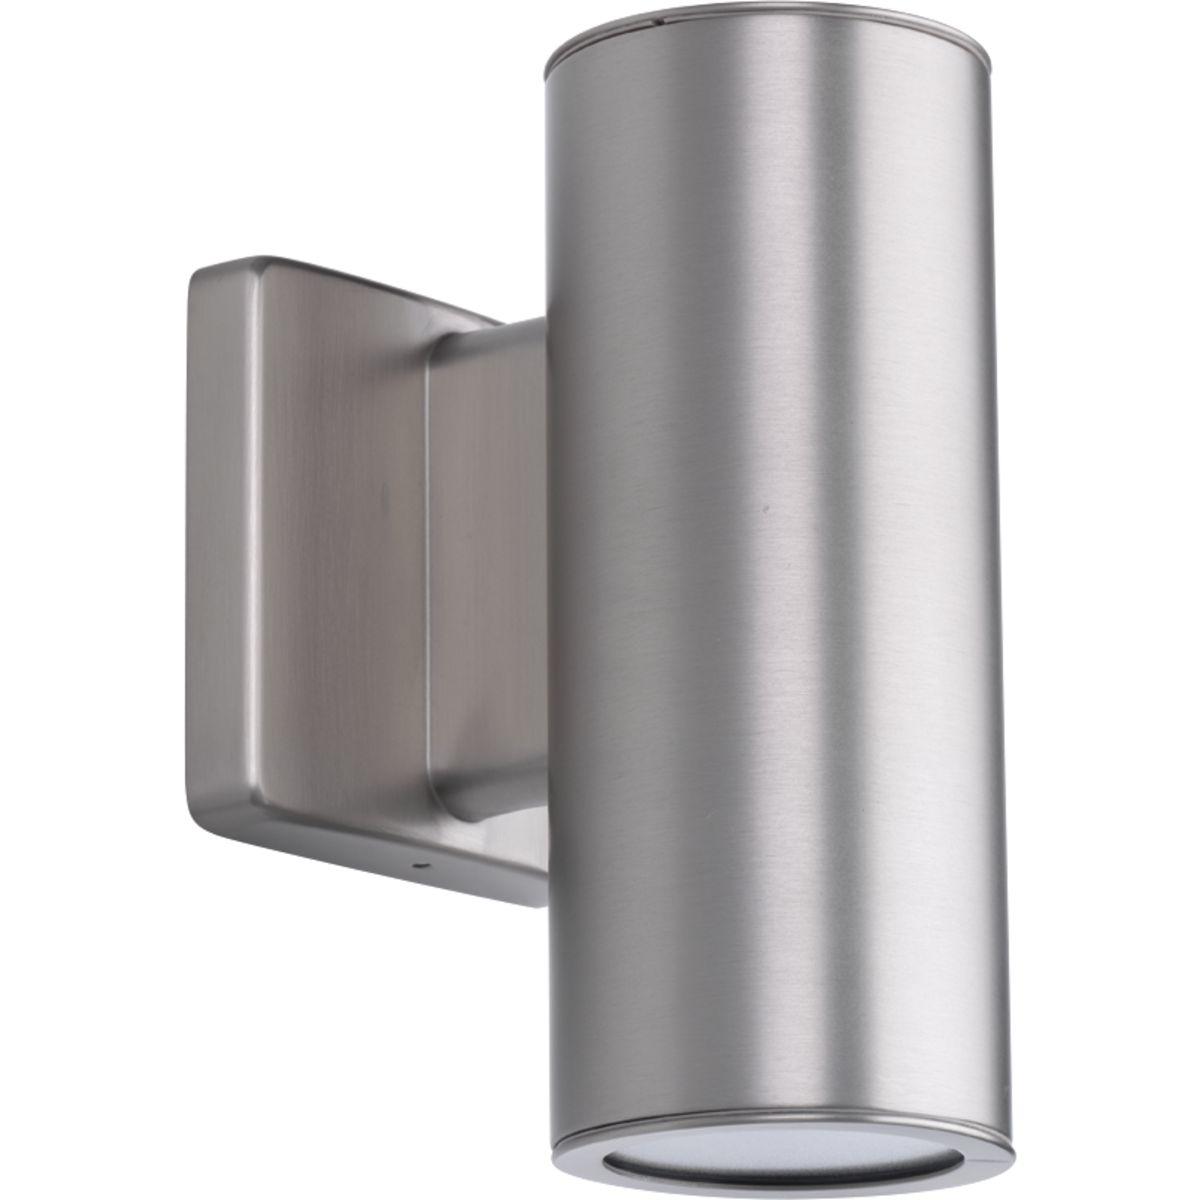 Hubbell P563001-147-30K Sleek, 3" LED cylindrical wall lantern with up/downlight in elegant Satin Nickel finish. Die-cast aluminum wall brackets and heavy-duty aluminum framing. Fade and chip-resistant. UL listed for wet locations. Can be used indoor or outdoor.  ; 3" LED wall m